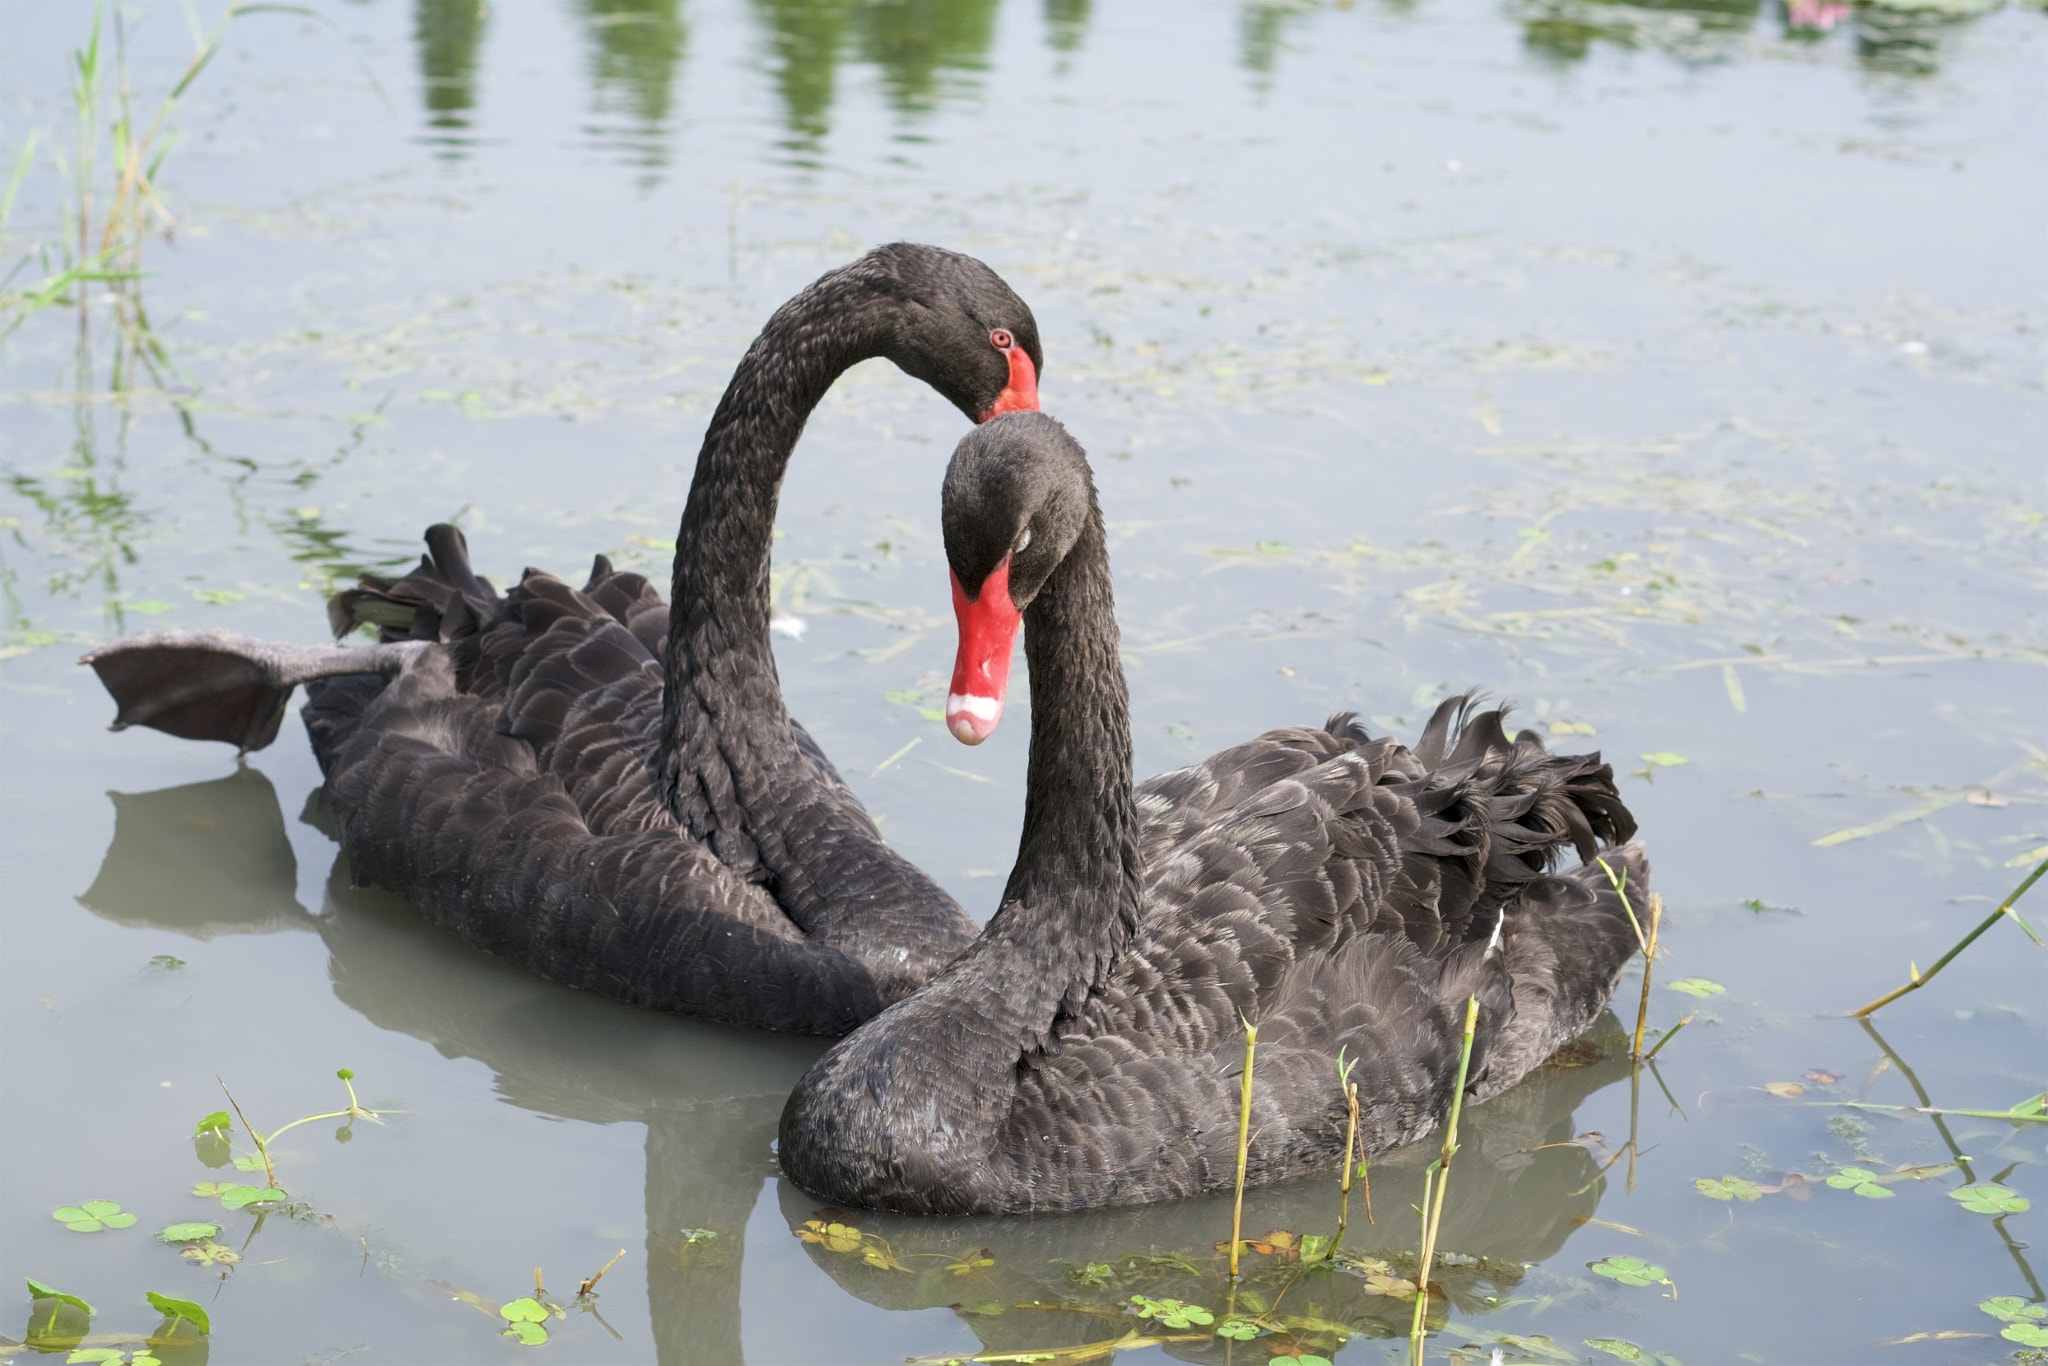 Sony a6300 + Sony Sonnar T* FE 55mm F1.8 ZA sample photo. Two black swans，very lovely photography